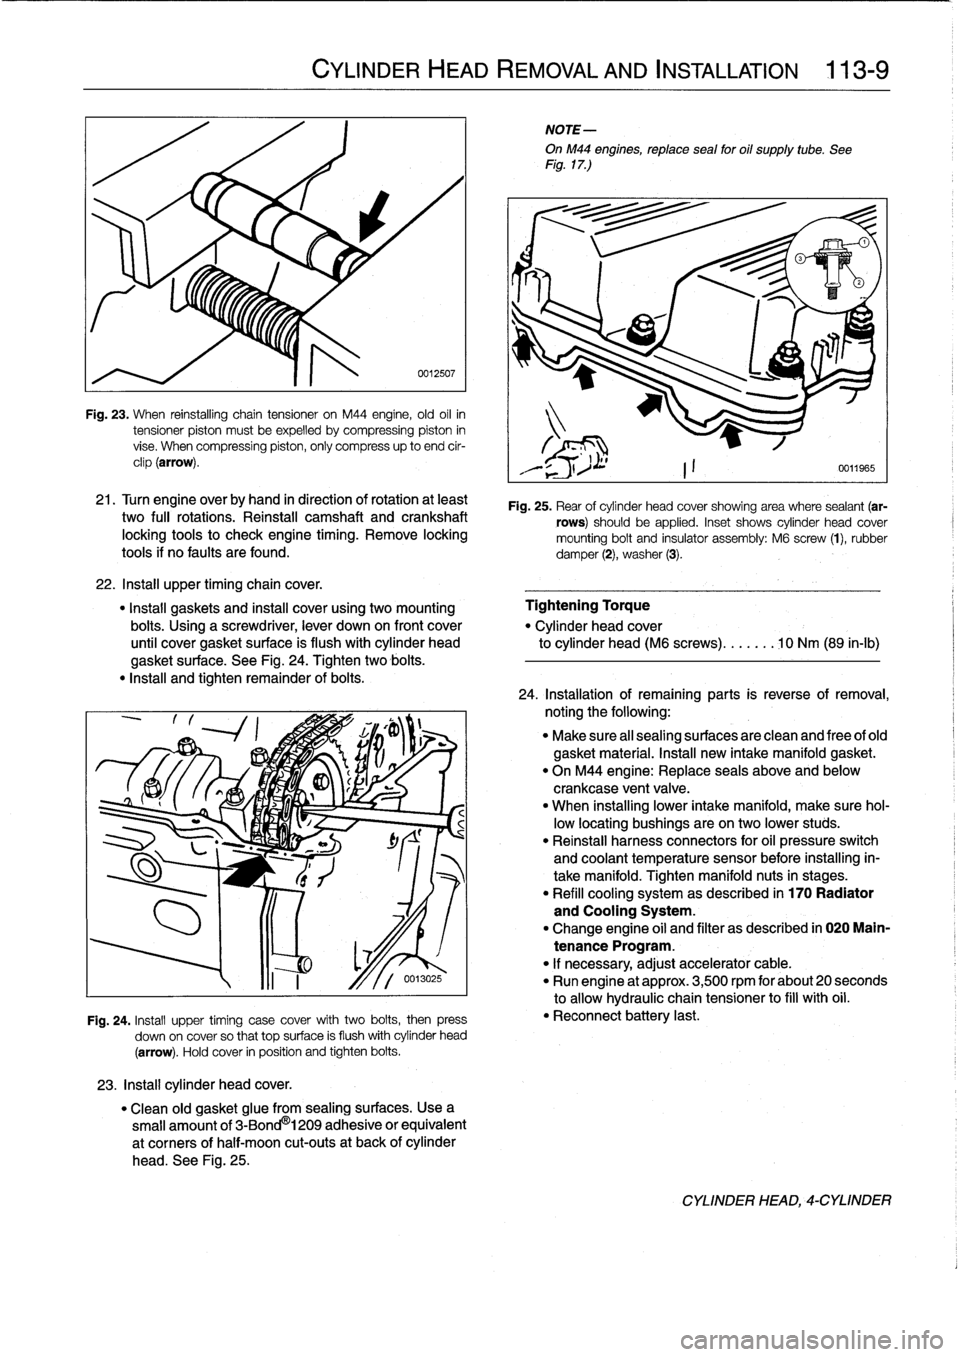 BMW 318i 1997 E36 Workshop Manual 
Fig
.
23
.
When
reinstalling
chain
tensioner
on
M44
engine,
old
oil
in
tensioner
piston
mustbe
expelled
bycompressing
piston
in
vise
.
When
compressing
piston,
only
compress
up
to
end
cir-
clip
(arro